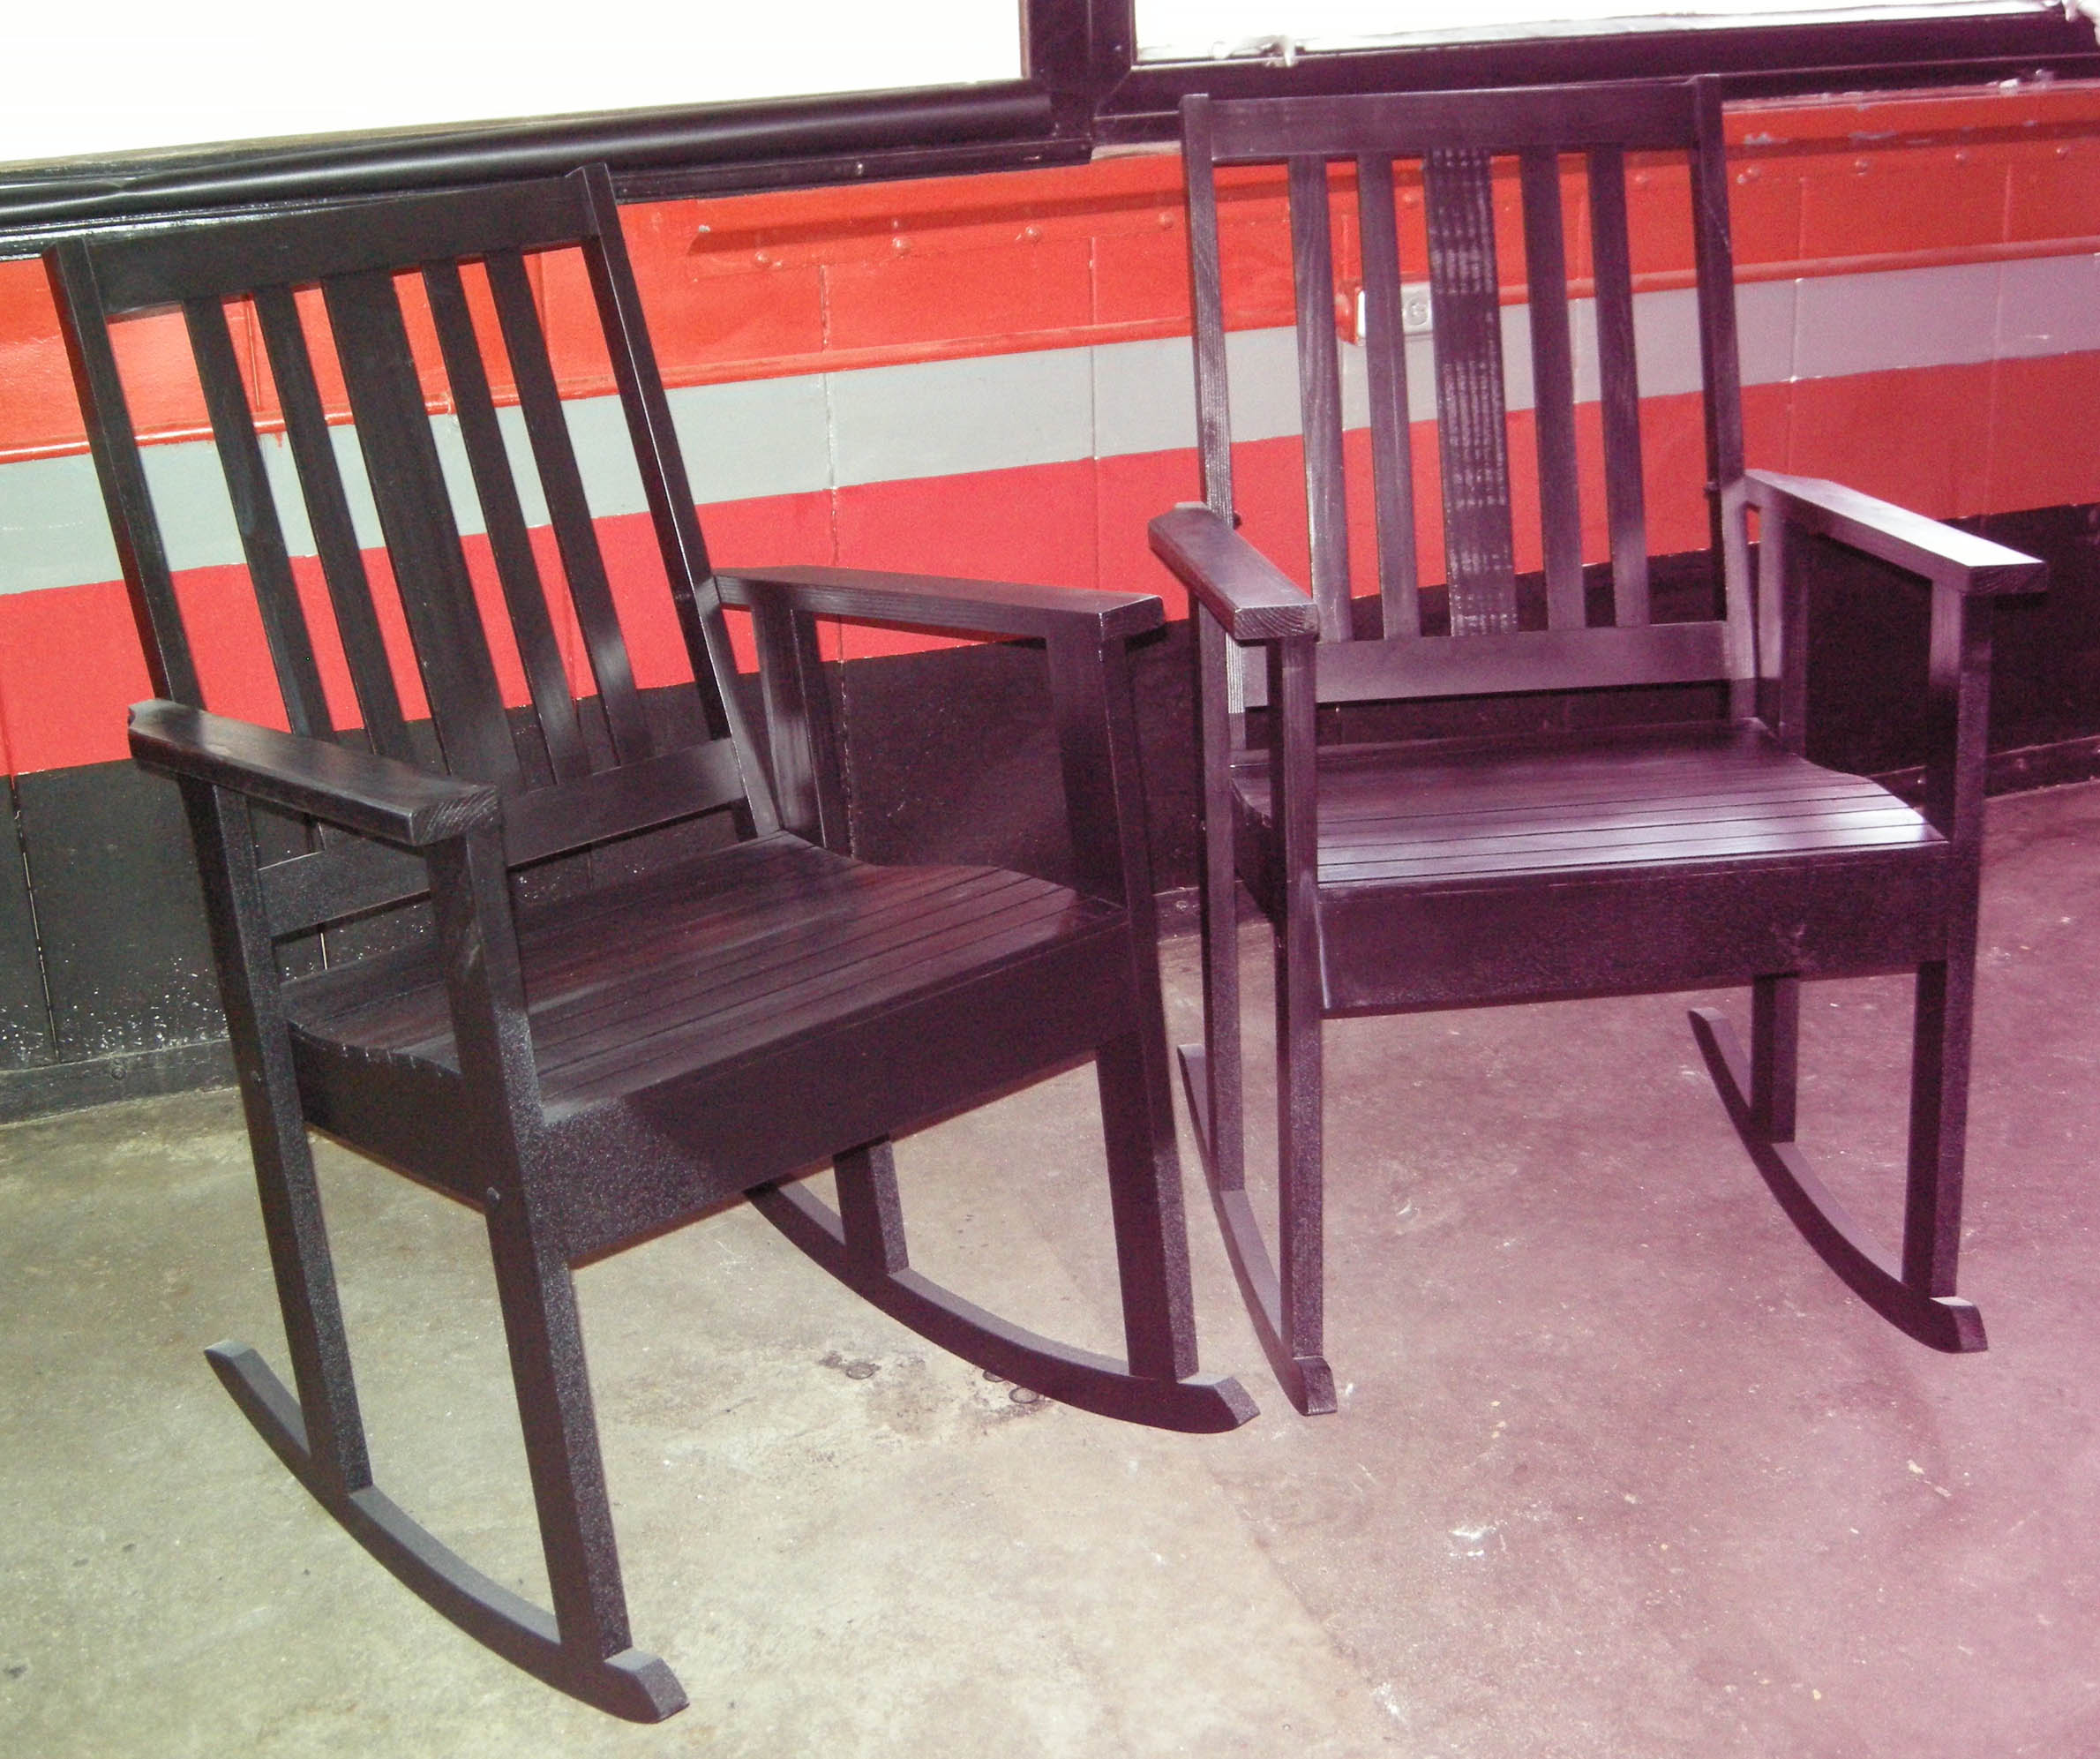 Click to enlarge,  These porch rockers will be among the items up for bid at the Central Carolina Community College Foundation's 19th Annual Furniture Auction Saturday, June 1, in the Multipurpose Room of the Miriello Building on the college's Harnett County Campus, 1075 E. Cornelius Harnett Blvd. Viewing and registration starts at 9 a.m. and bidding at 10 a.m. For more information about the CCCC Foundation Furniture Auction, call 910-893-9101 or go online to www.cccc.edu/auction to see a photo gallery of the auction pieces. 